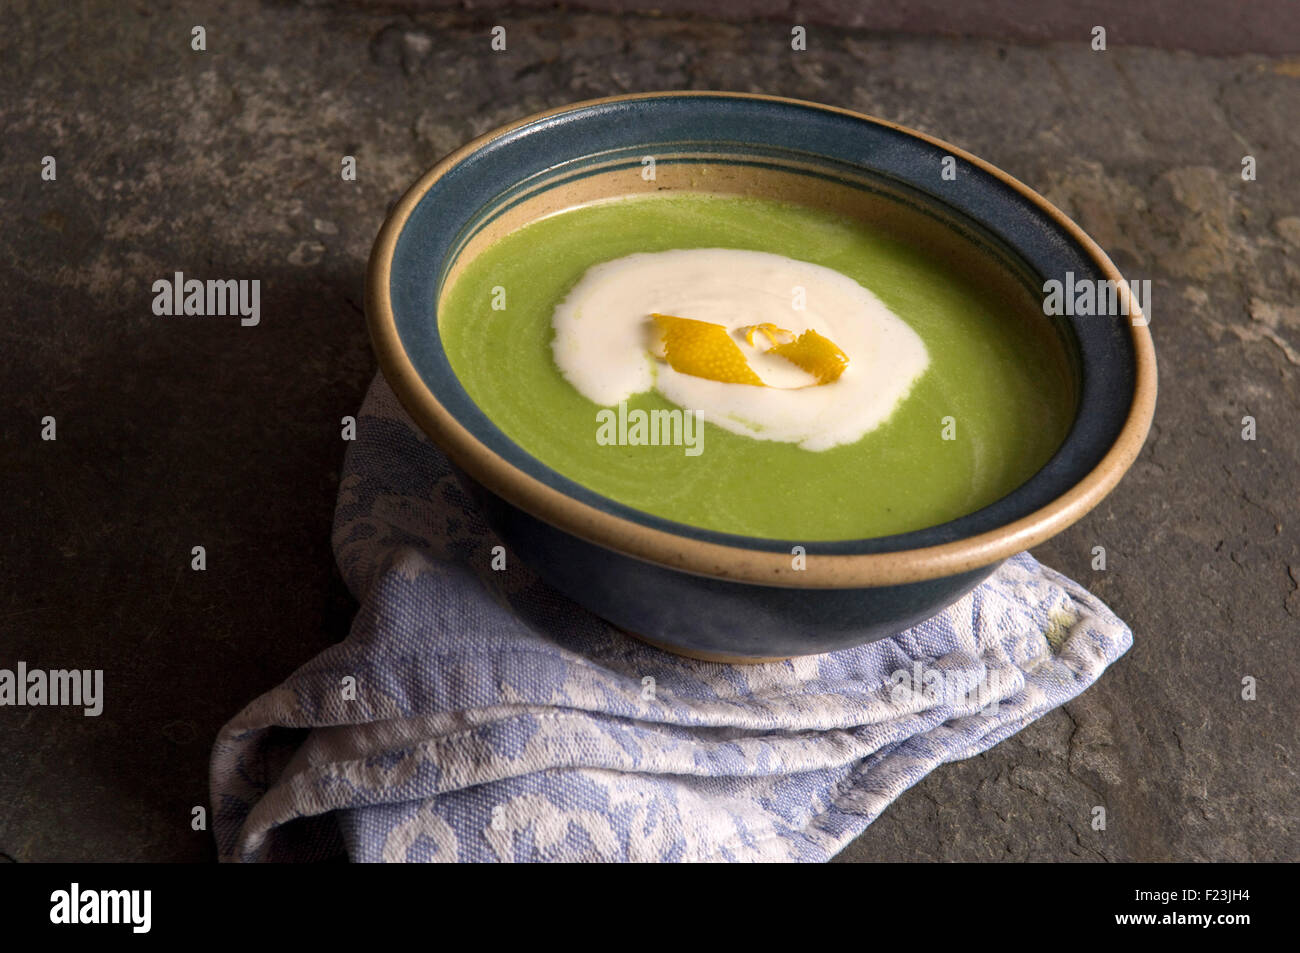 Pea soup with cream and orange peel. a UK food vegetable bowl meal 'small plate' dish eating cooking Stock Photo